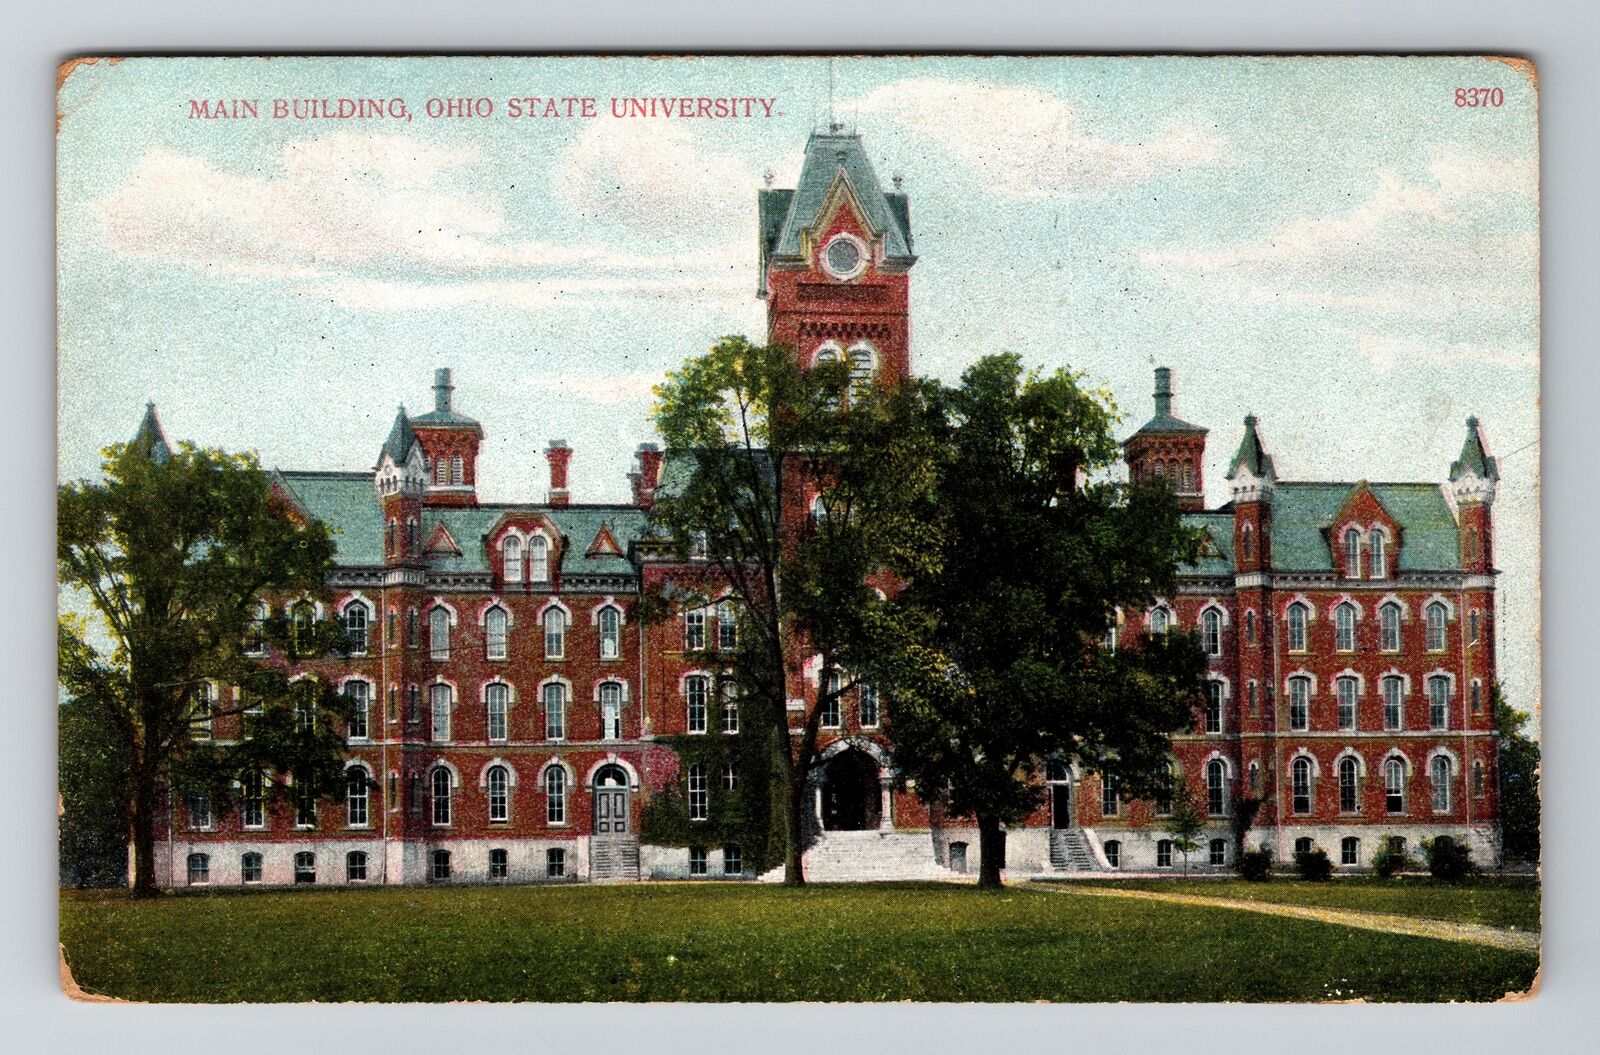 OH-Ohio, Main Building, Ohio State University, Front View, Vintage Postcard